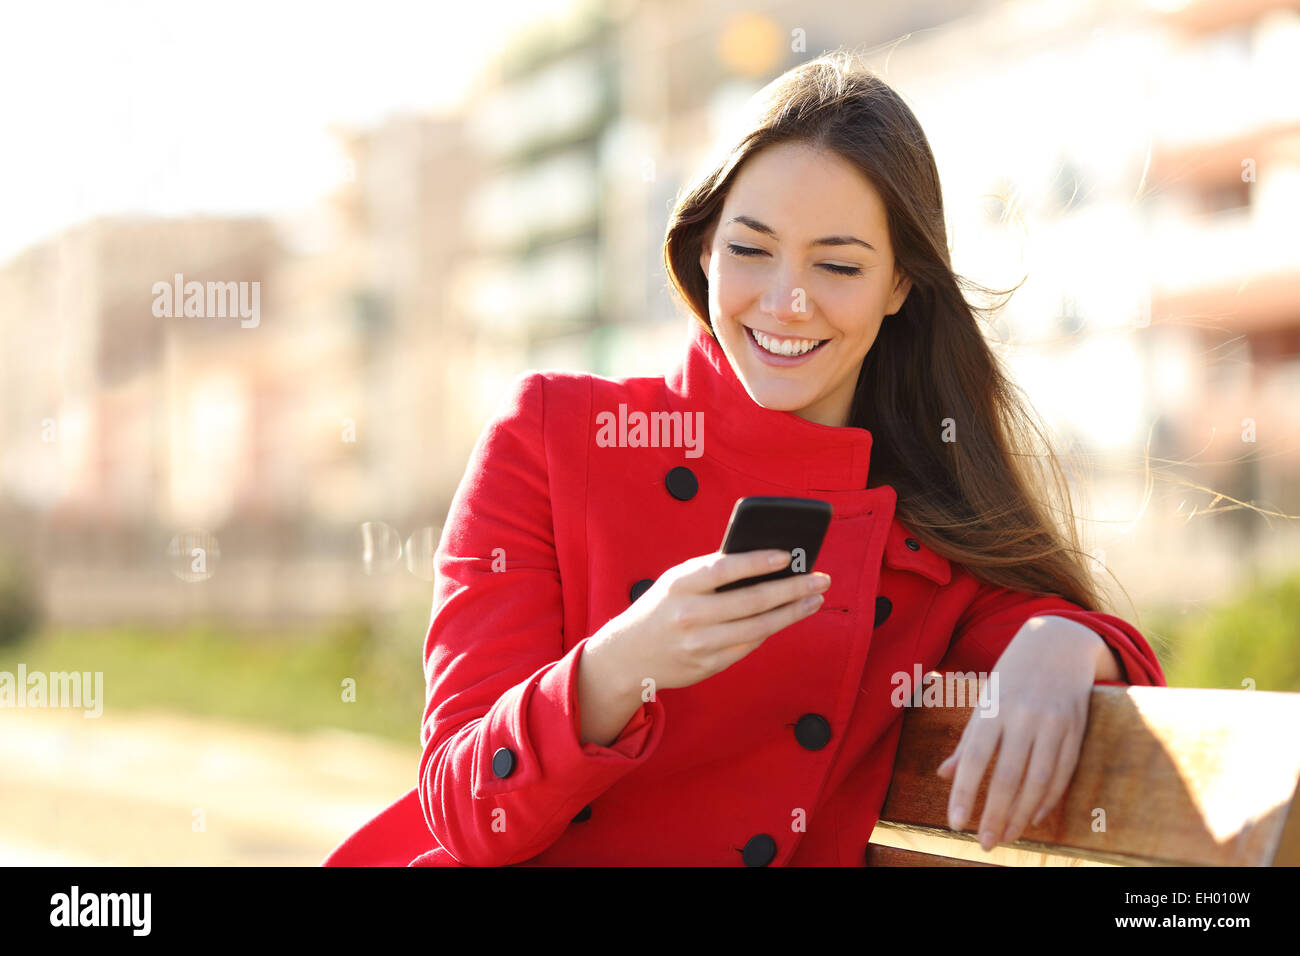 Girl texting on the smart phone sitting in a park wearing a red jacket and sitting in a bench in a park Stock Photo